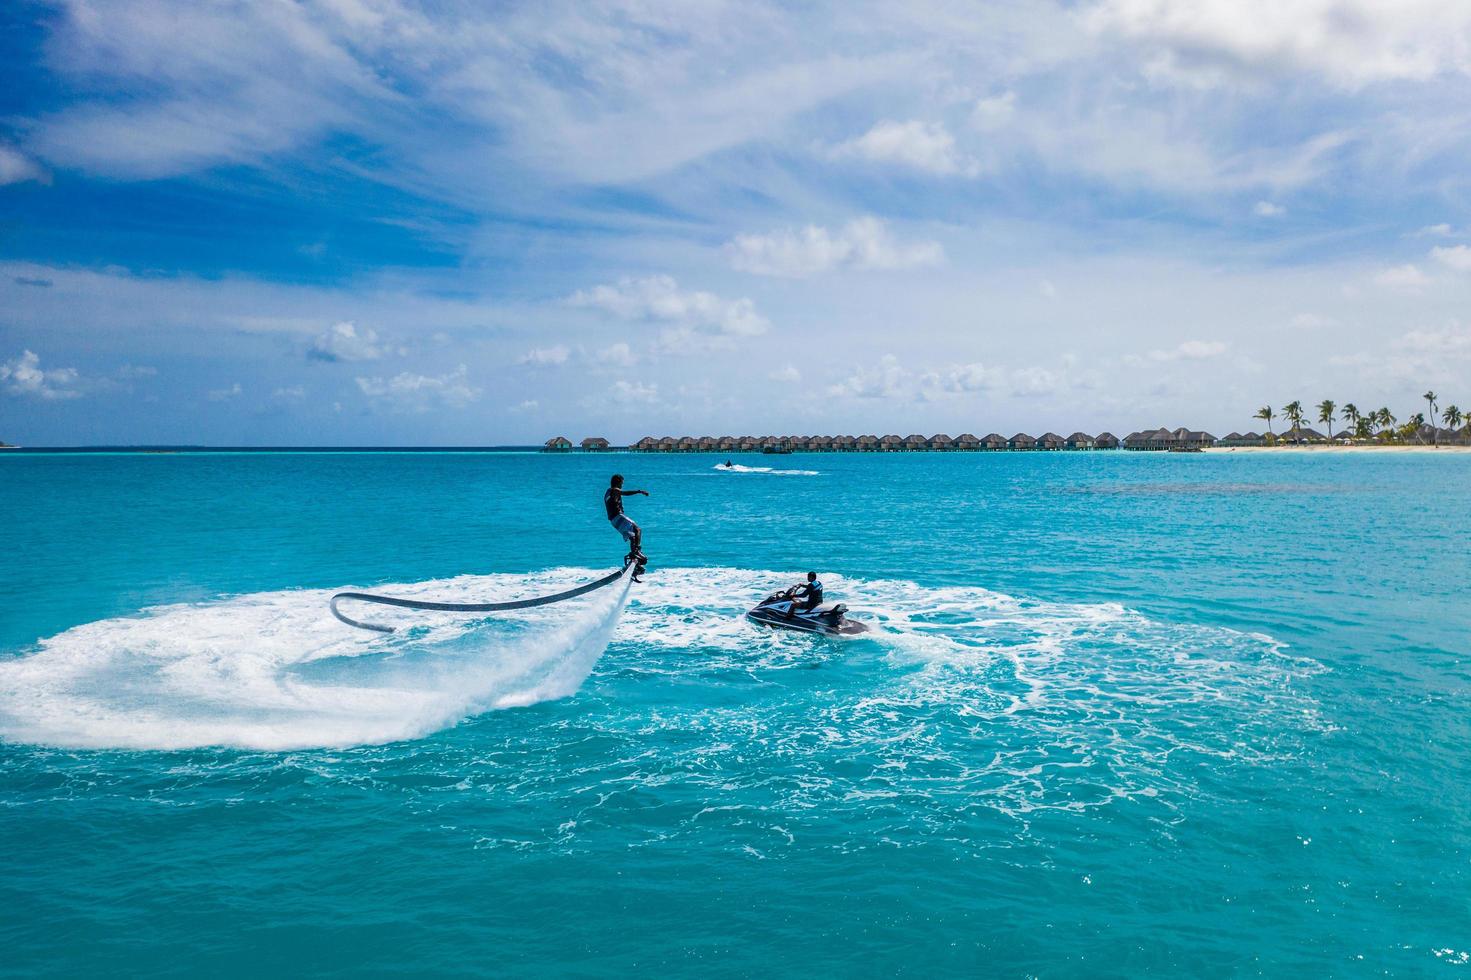 08.14.19, Iru Veli, Maldives islands, Aerial view of water extreme action sport, summer sea, close to luxury tropical resort . Fly board ocean lagoon, freedom fun summer recreational activity photo